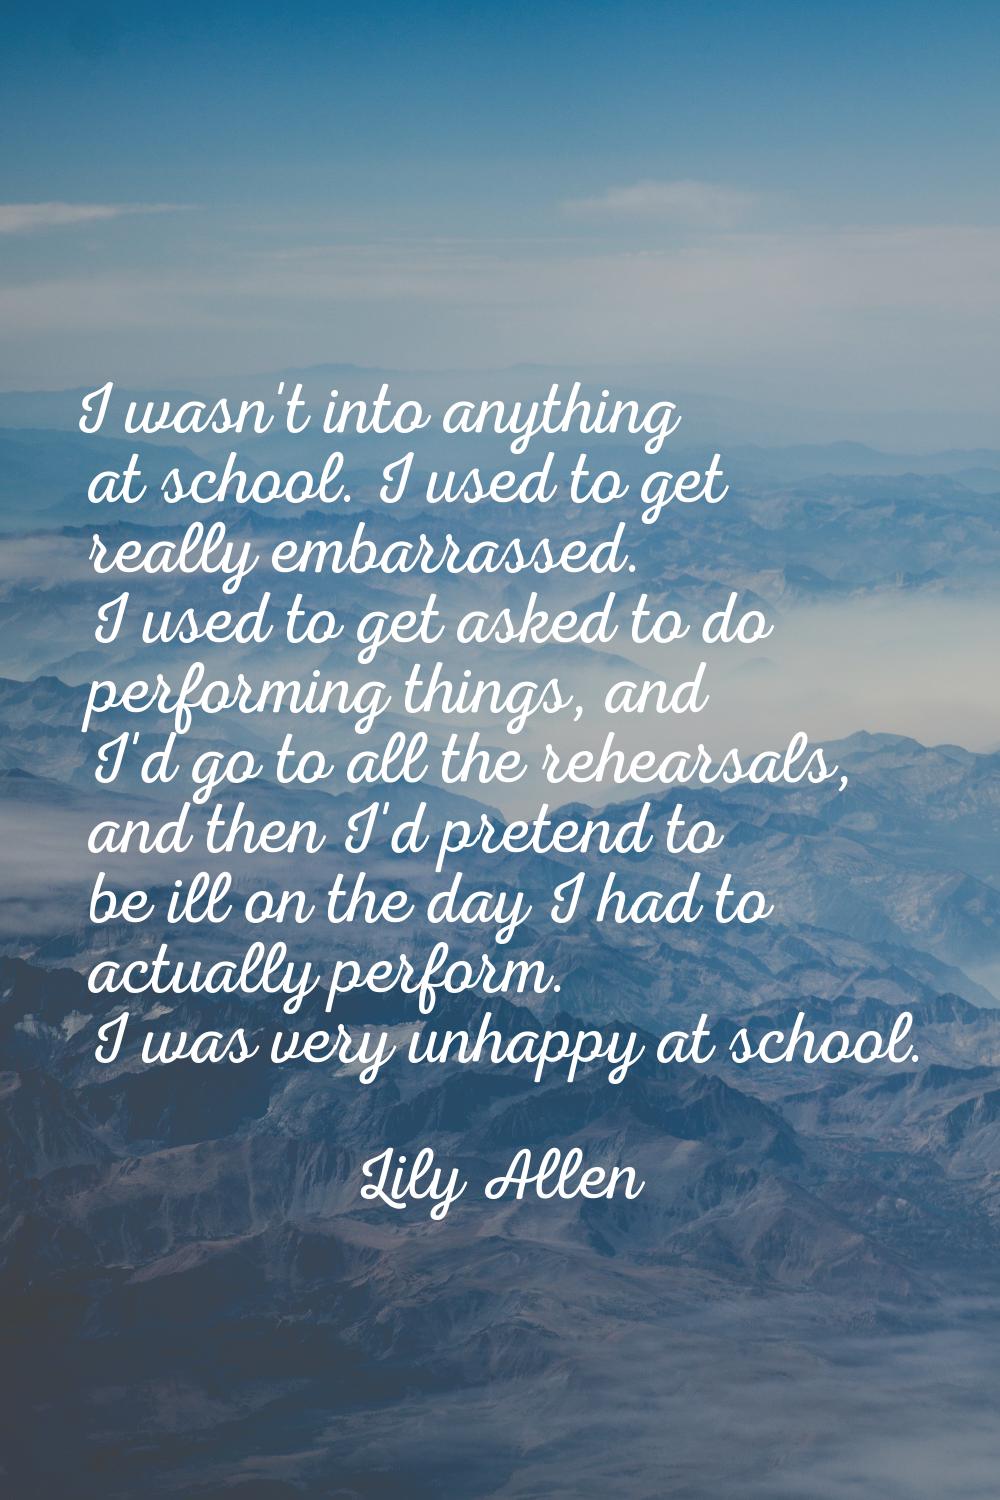 I wasn't into anything at school. I used to get really embarrassed. I used to get asked to do perfo